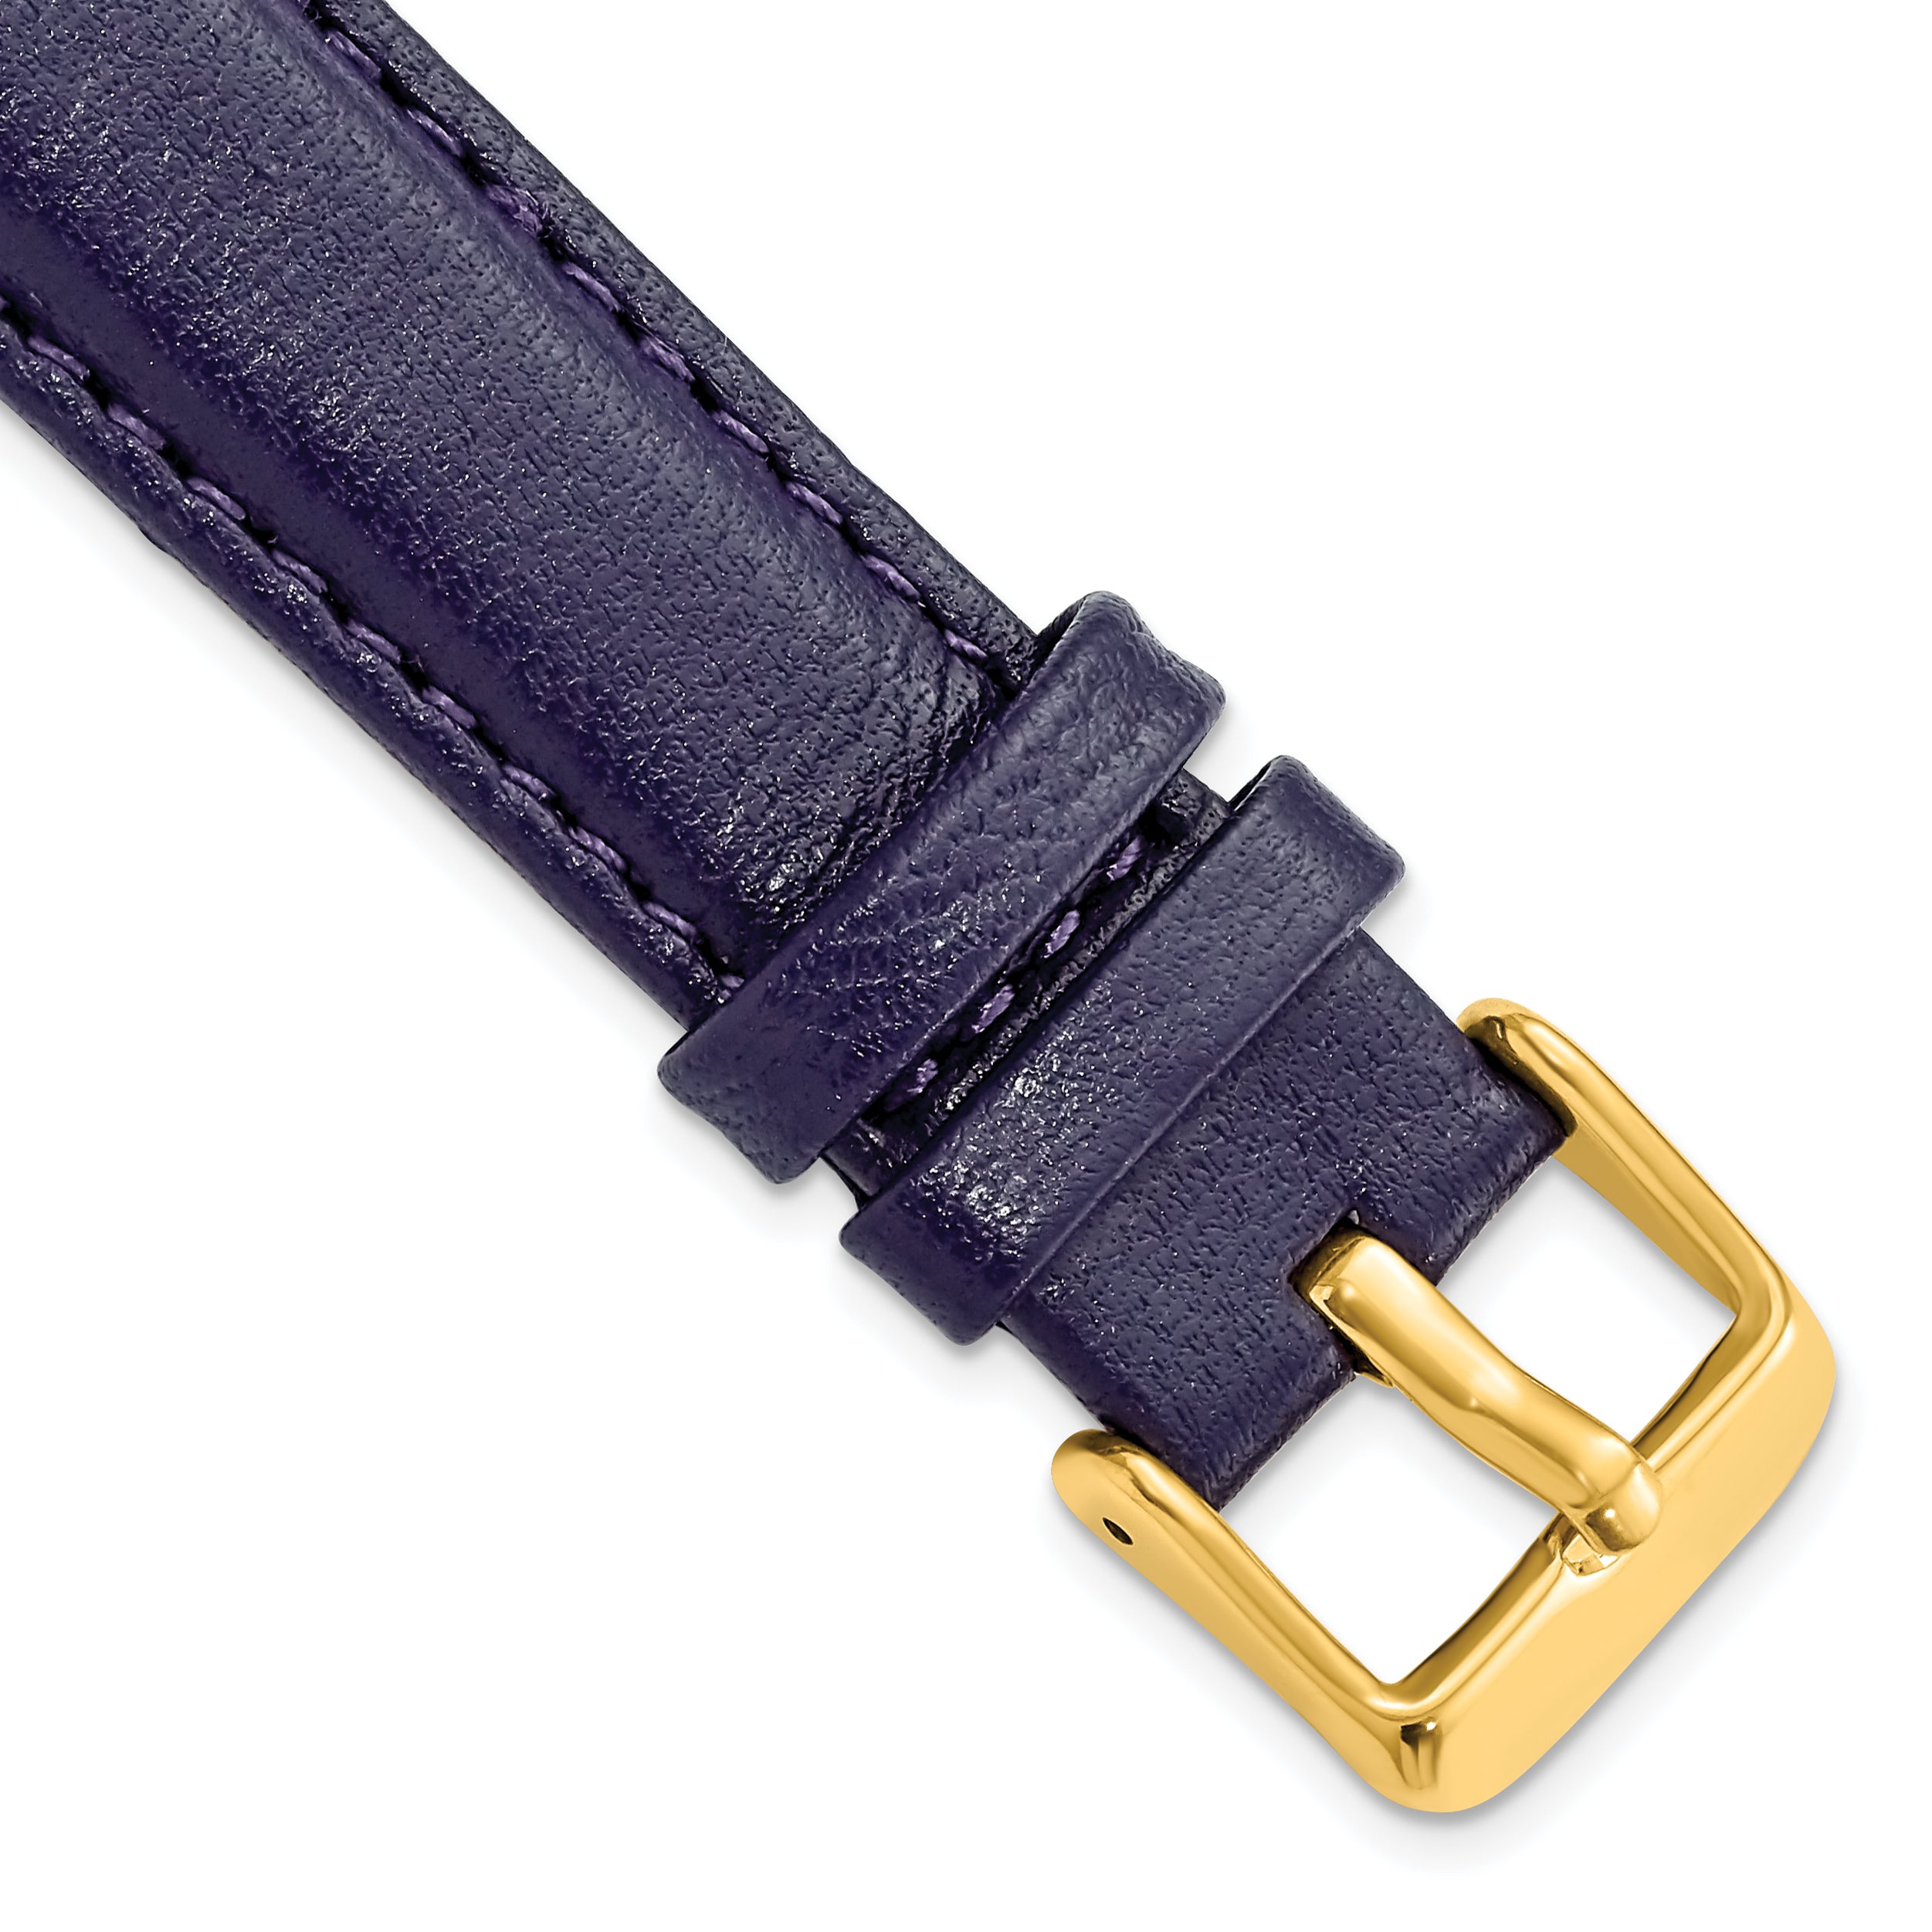 DeBeer 18mm Navy Glove Leather with Gold-tone Panerai Style Buckle 7.75 inch Watch Band